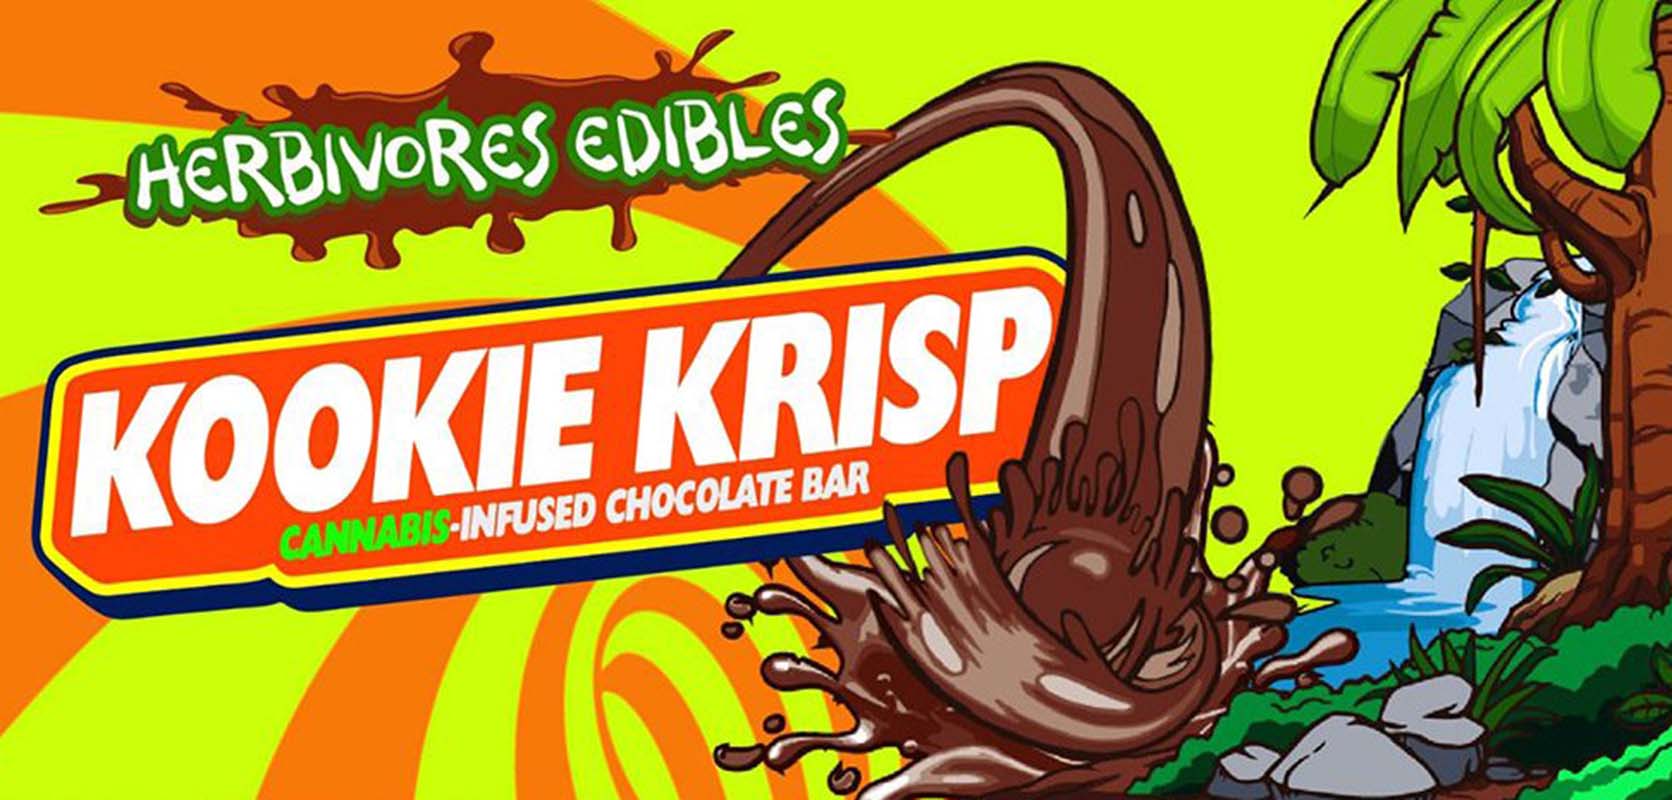 Weed candy bard from Herbivore Edibles. Kookie Krisp Weed Chocolate Bars at Low Price Bud dispensary. buy marijuana online cheap. cheapest online dispensary canada. 